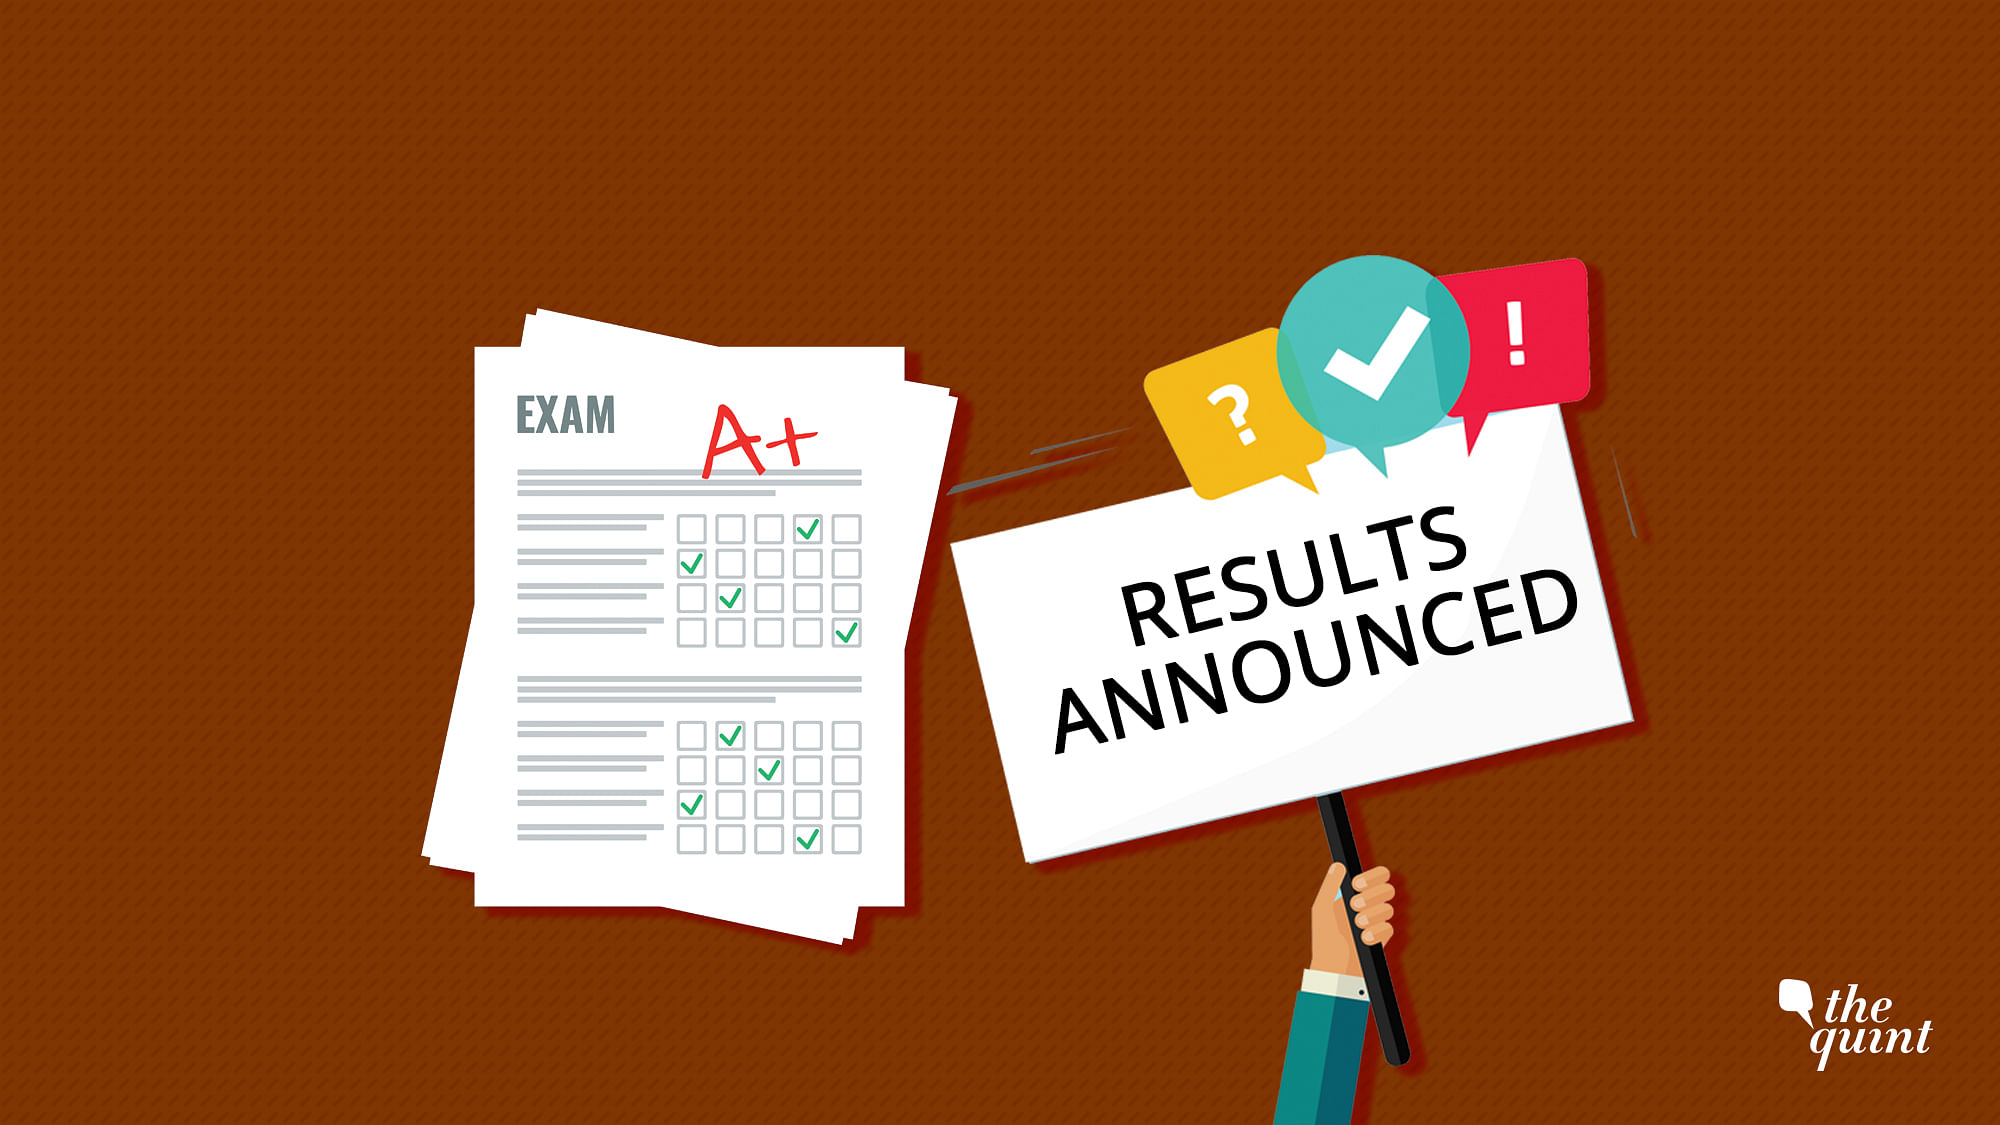 Bihar State Board exam class 12 results declared today, Highlights List of Toppers